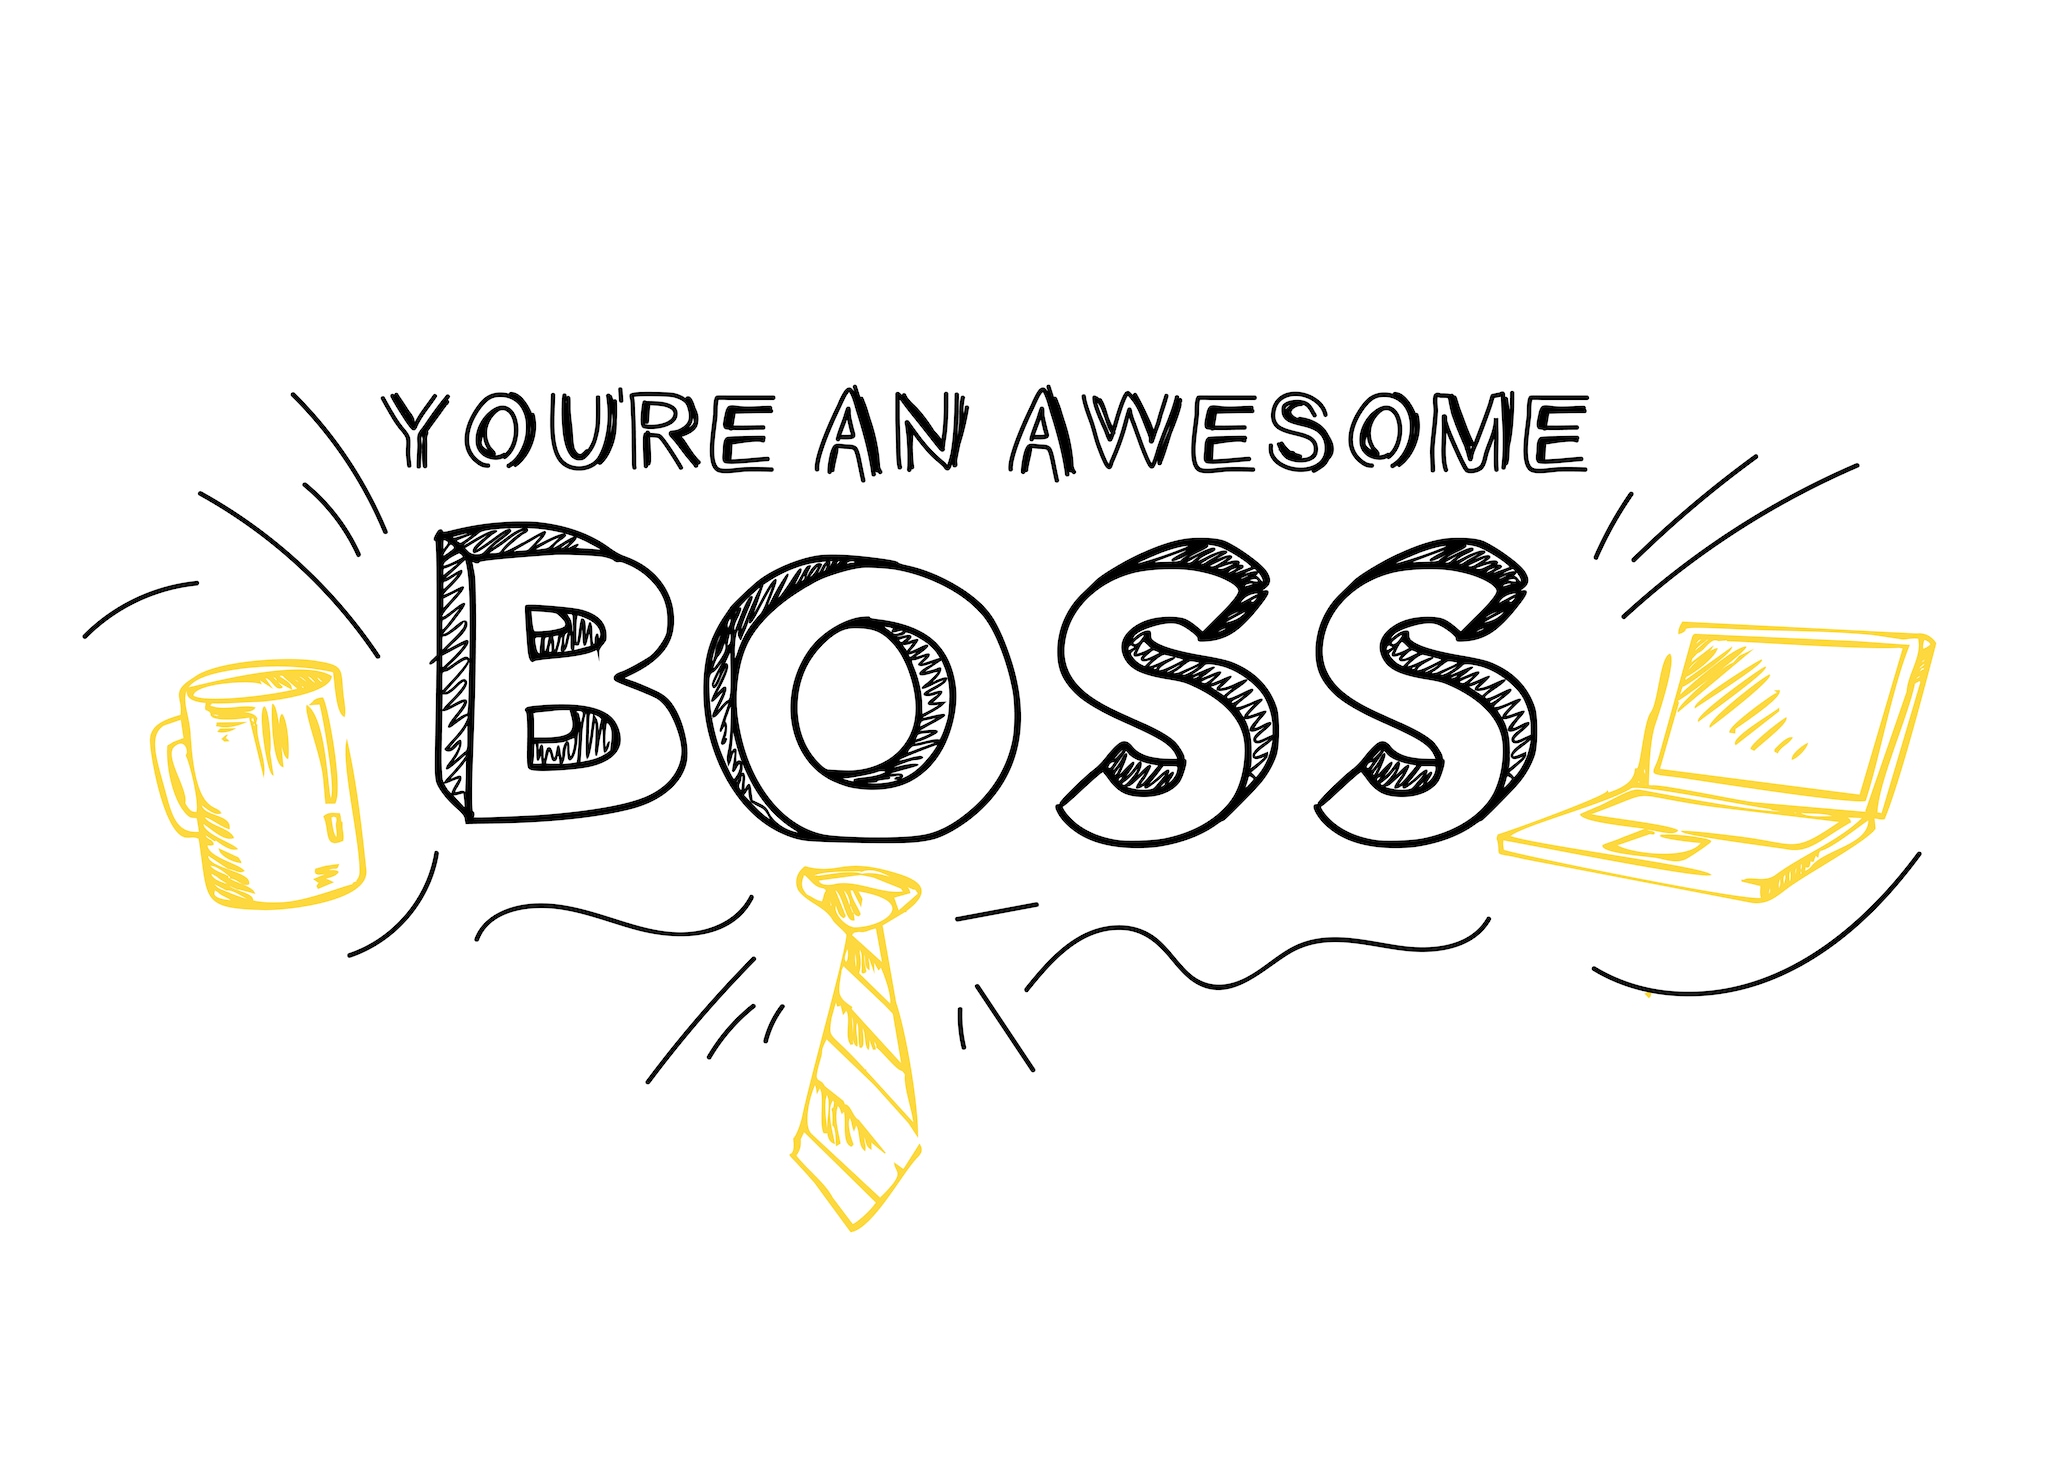 Happy World Boss Day 2022: Images, Wishes, Quotes, Messages and WhatsApp Greetings to Share. (Image: Shutterstock)